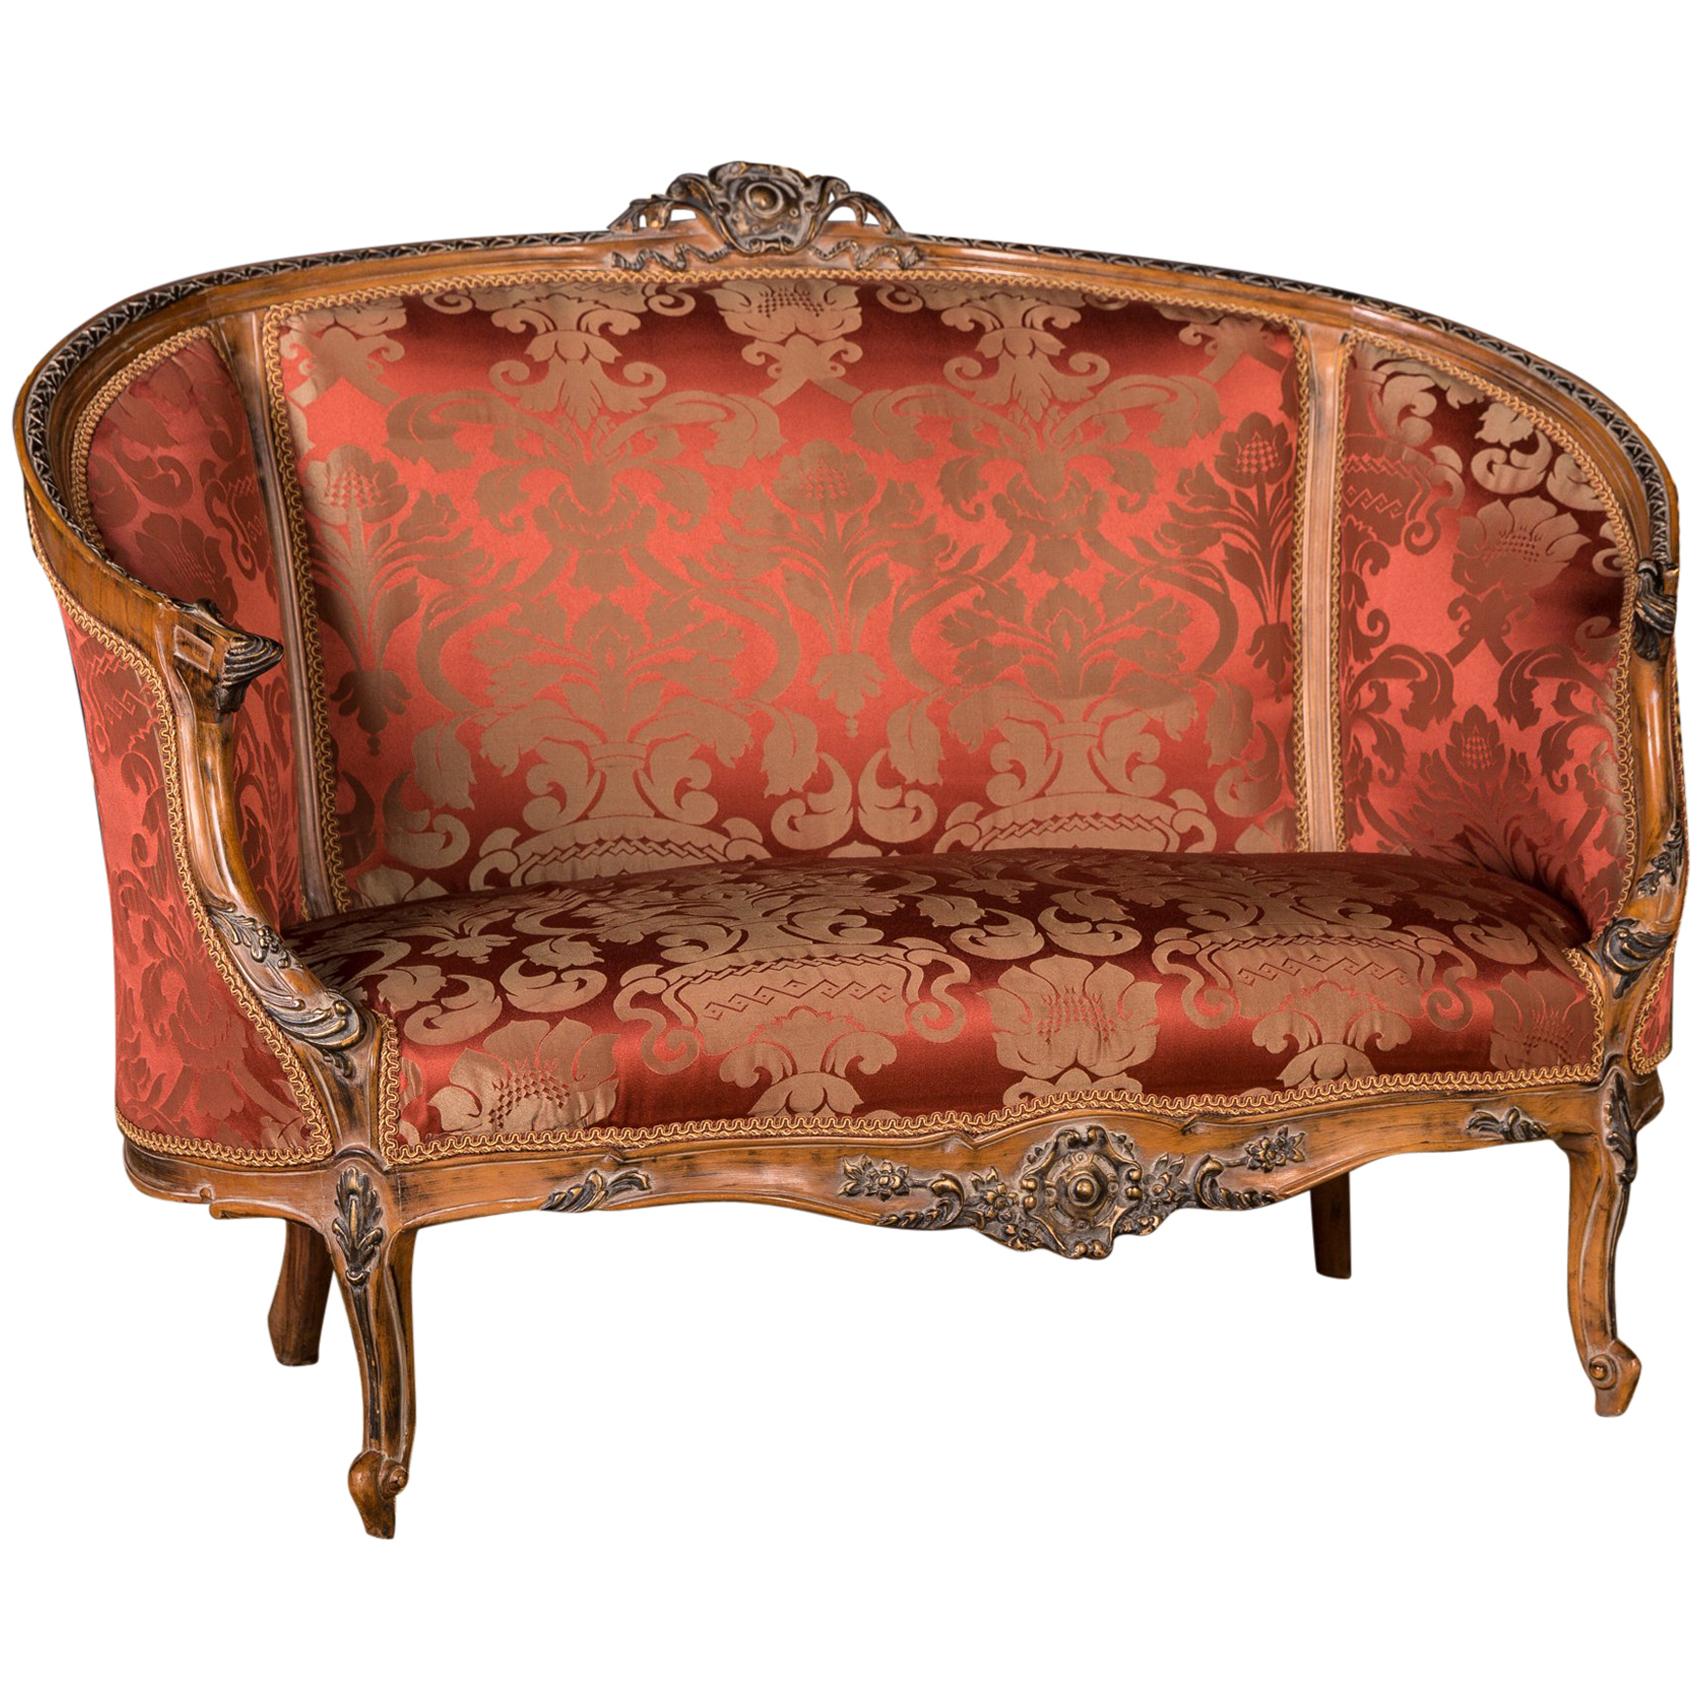 French Sofa Kanapee Canape in Louis Seize Style with Red Ornamental Upholstery